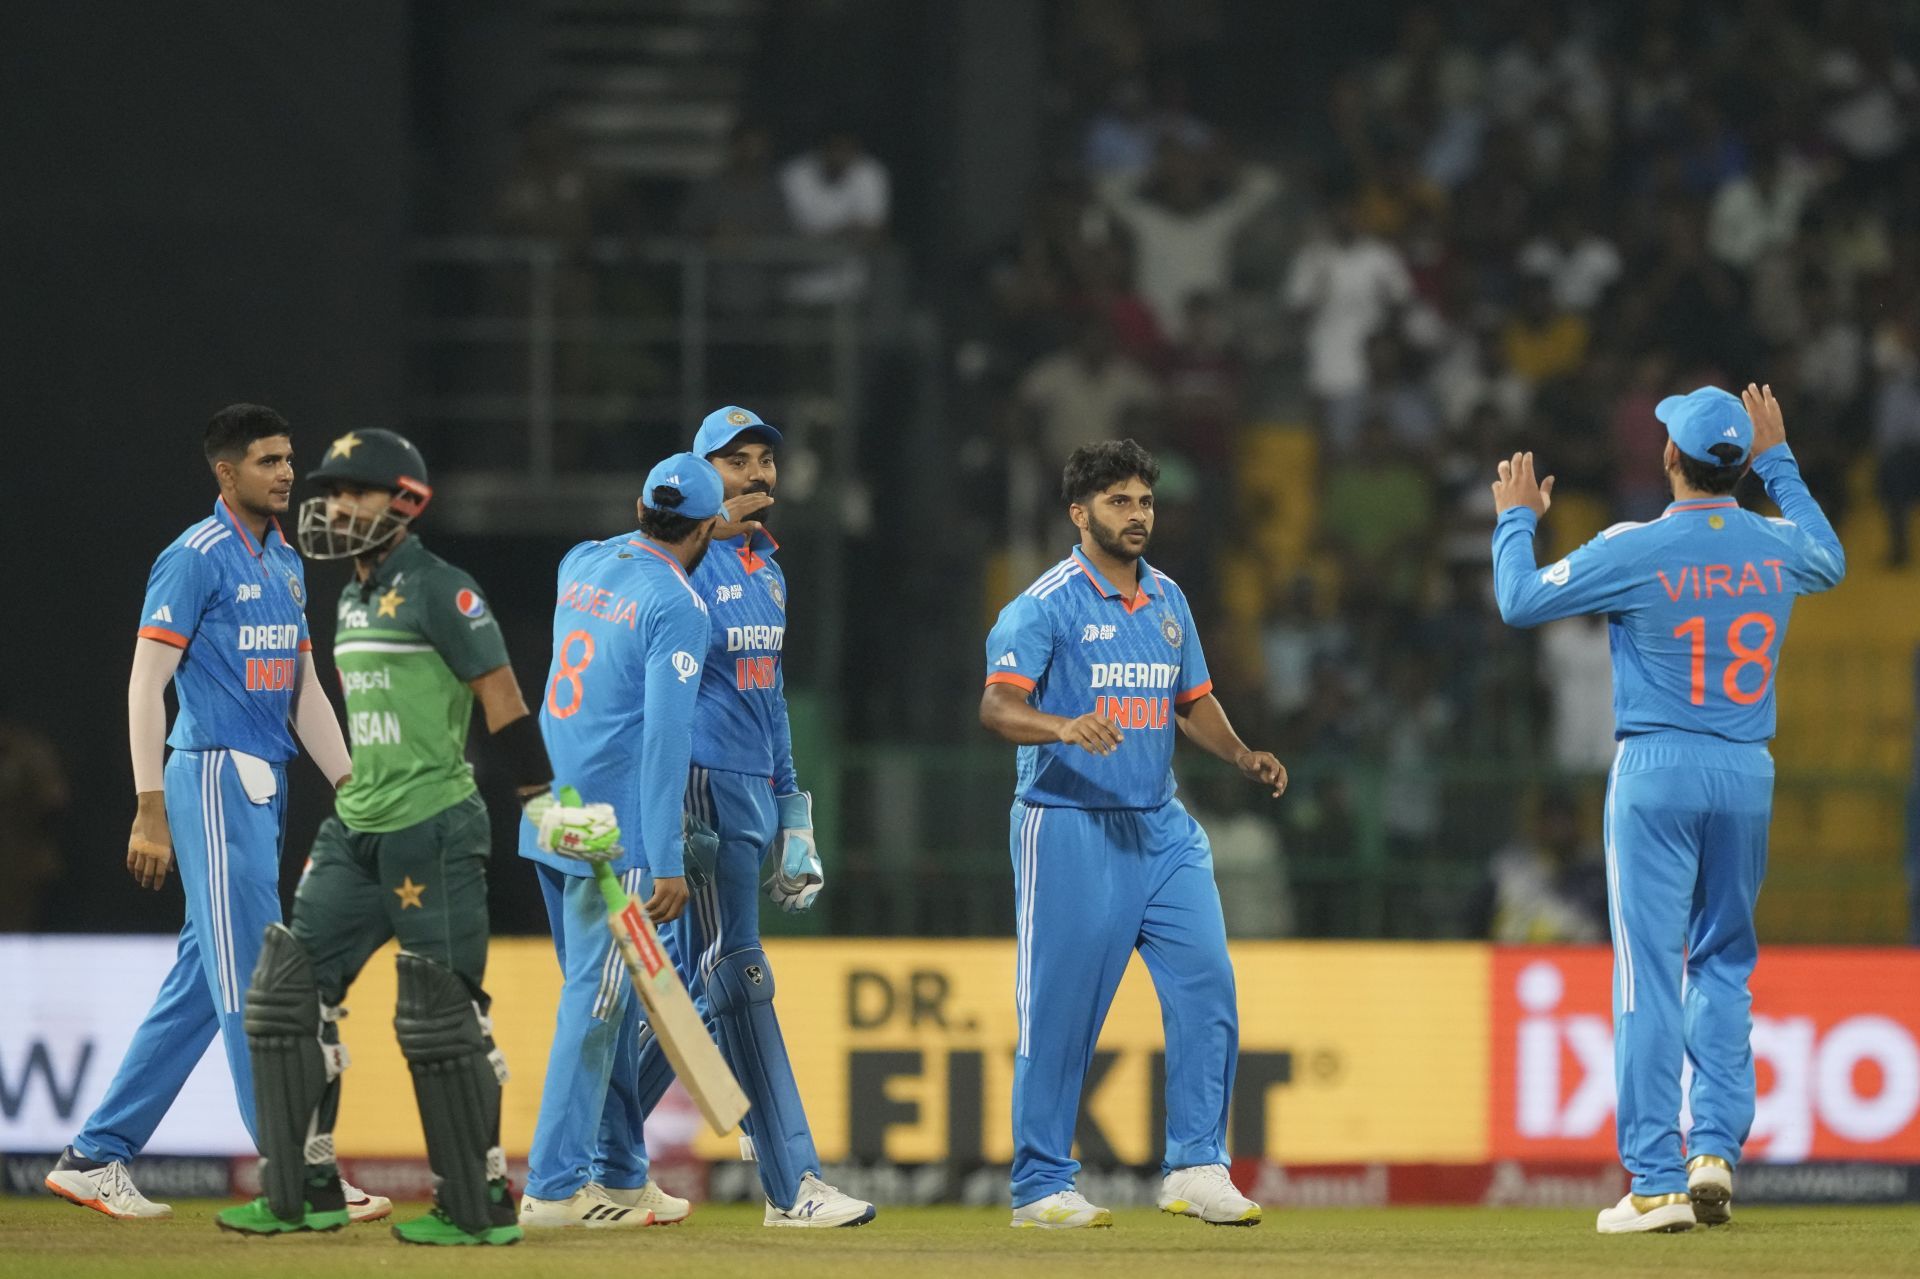 Shardul Thakur also got among the wickets, having Mohammad Rizwan caught behind for 2 with a jaffa. The dismissal left Pakistan in tatters at 47/3 in the 12th over. (Pic: AP Photo/Eranga Jayawardena)